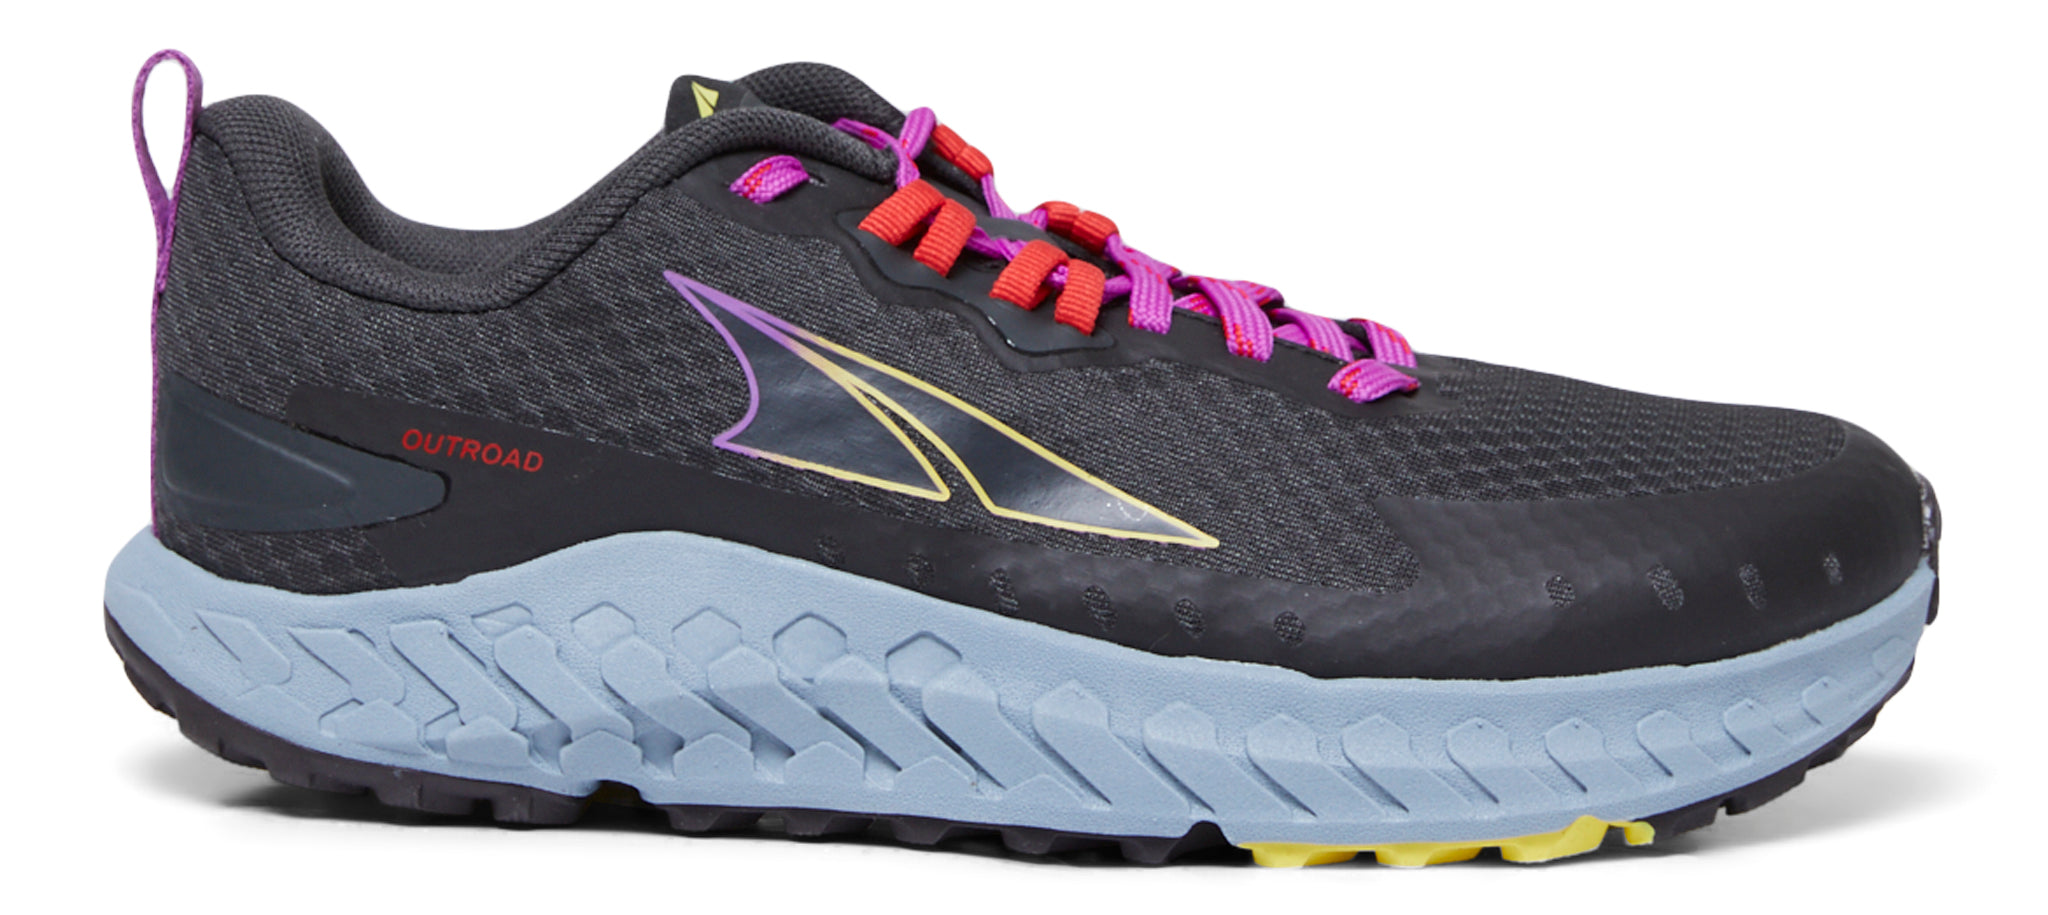 Altra Outroad Trail Running Shoes - Women's | The Last Hunt